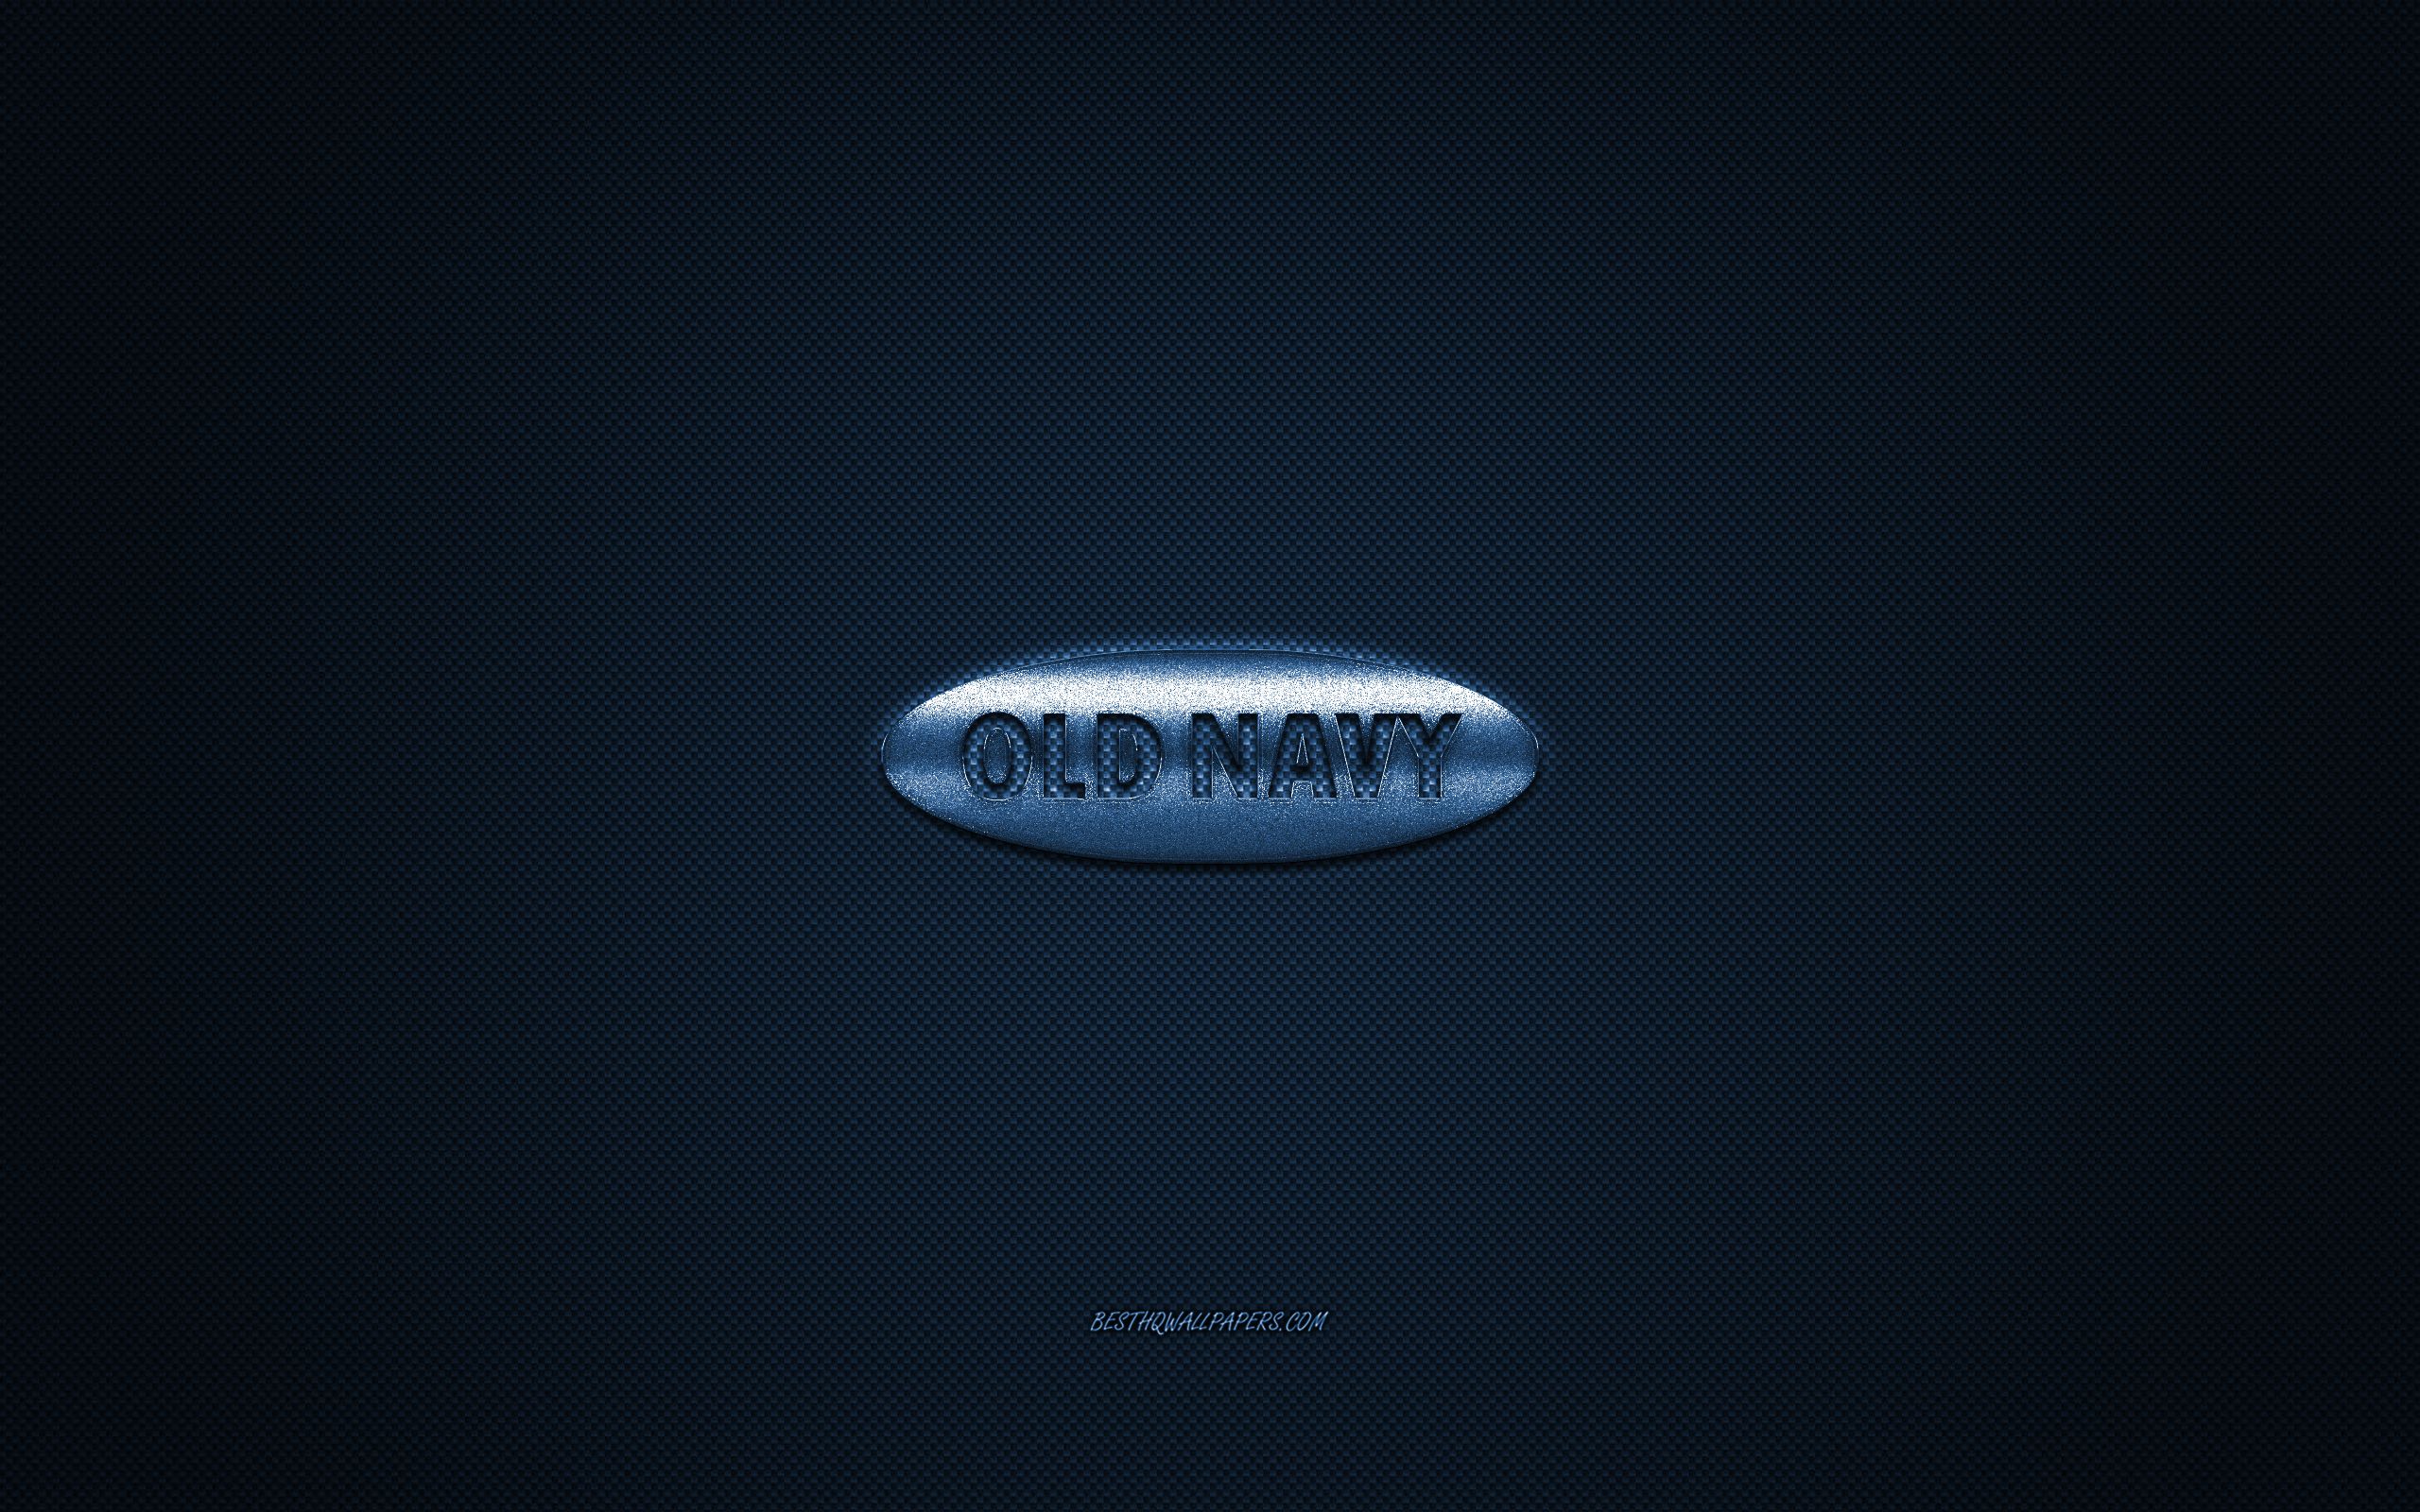 Old Navy Wallpaper Free Old Navy Background